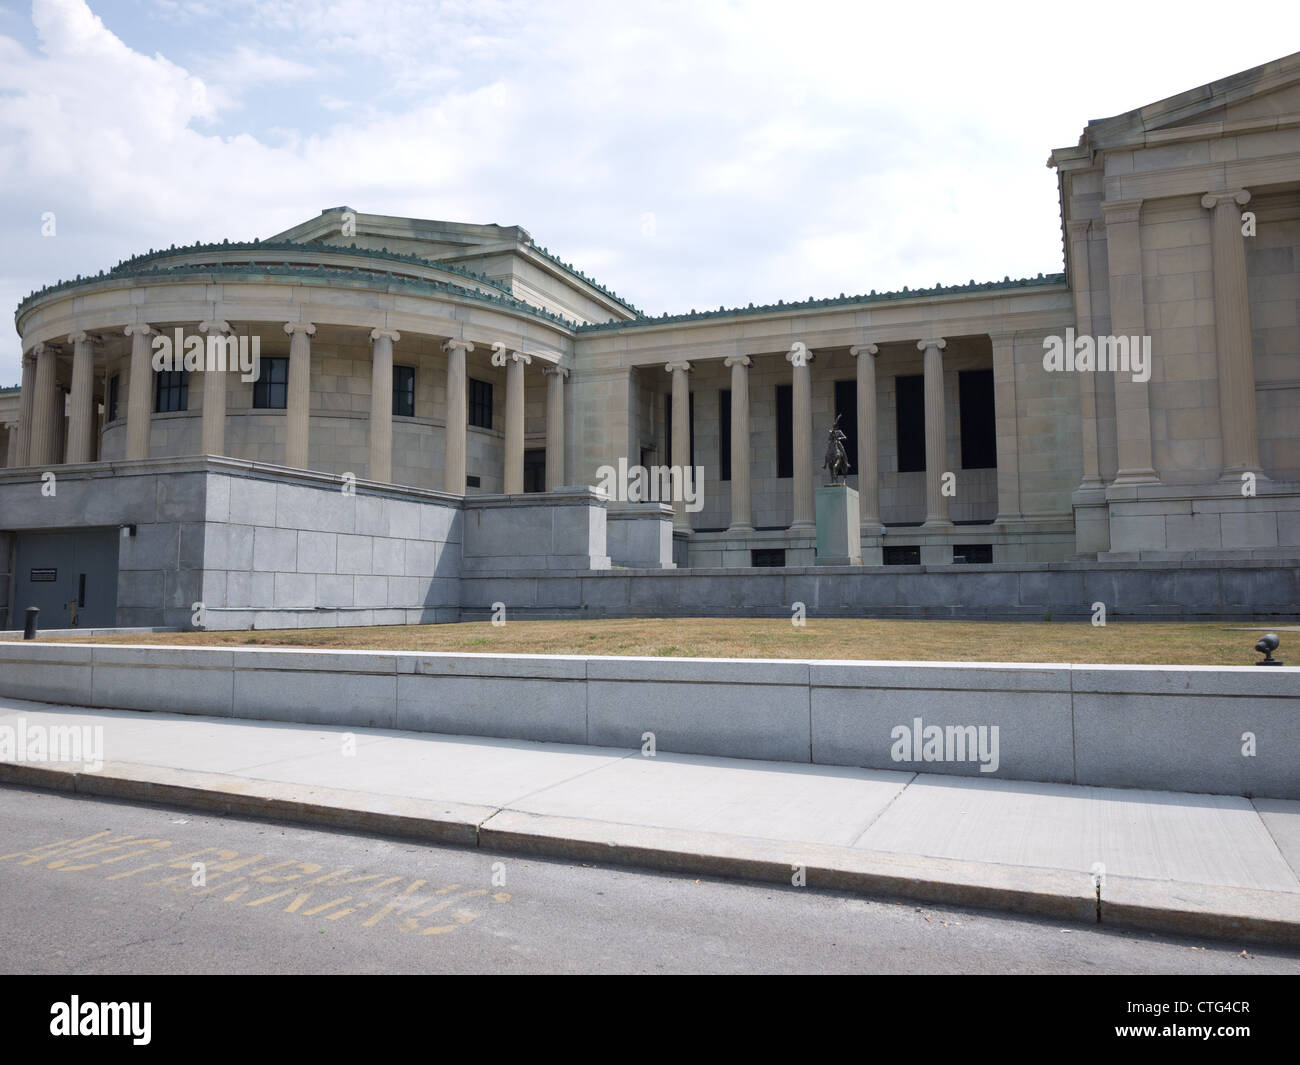 Albright-knox art gallery Banque D'Images